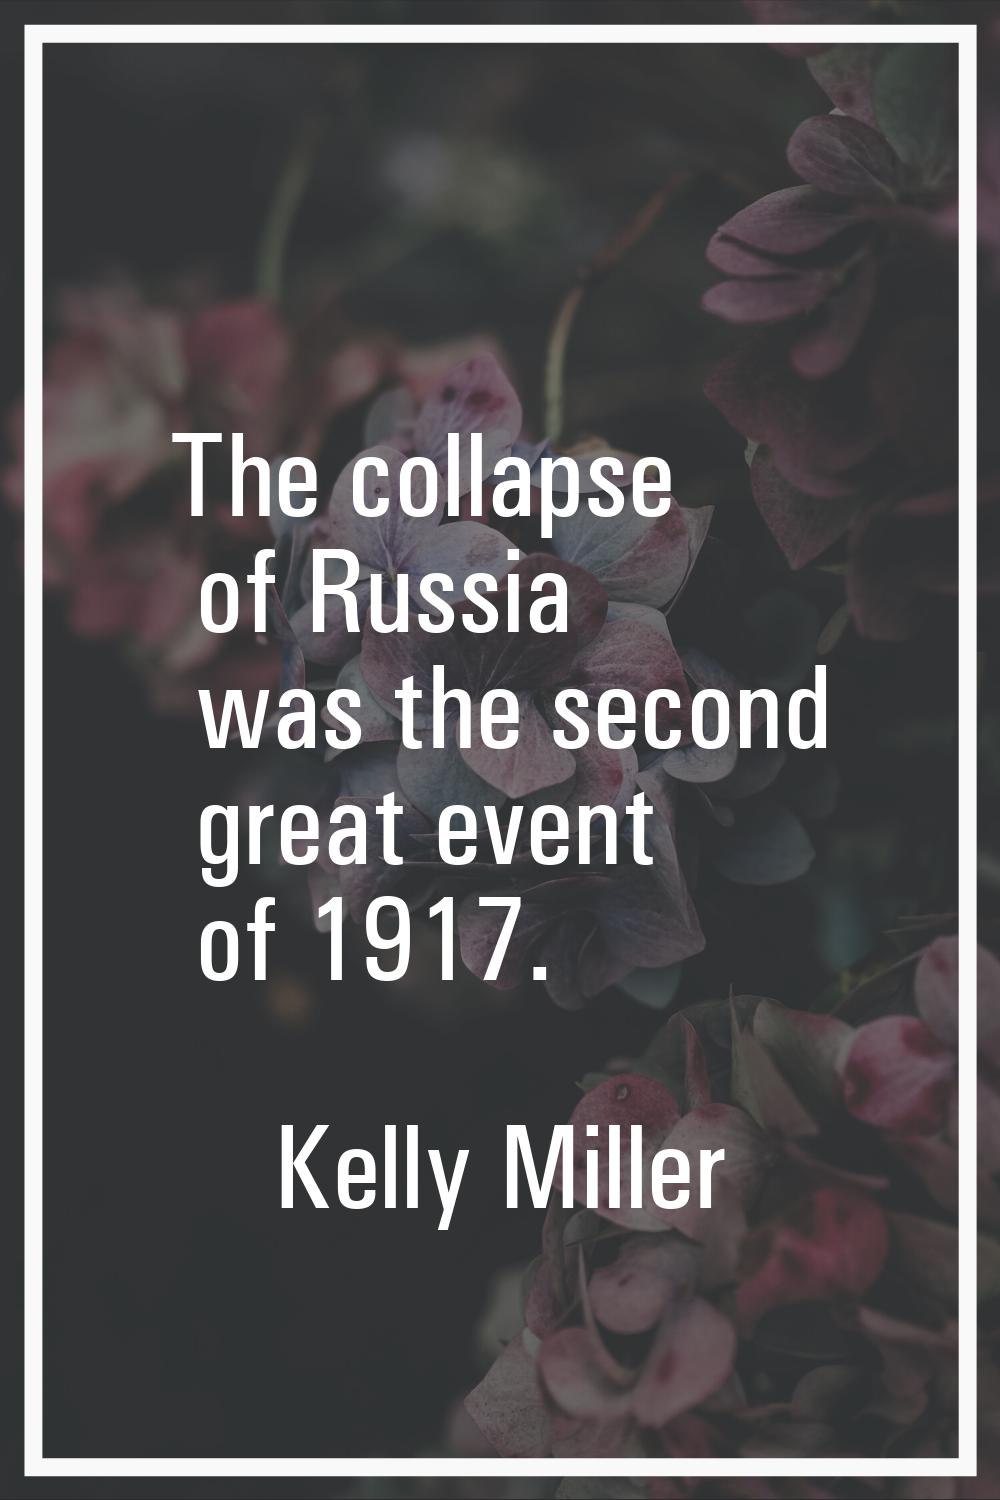 The collapse of Russia was the second great event of 1917.